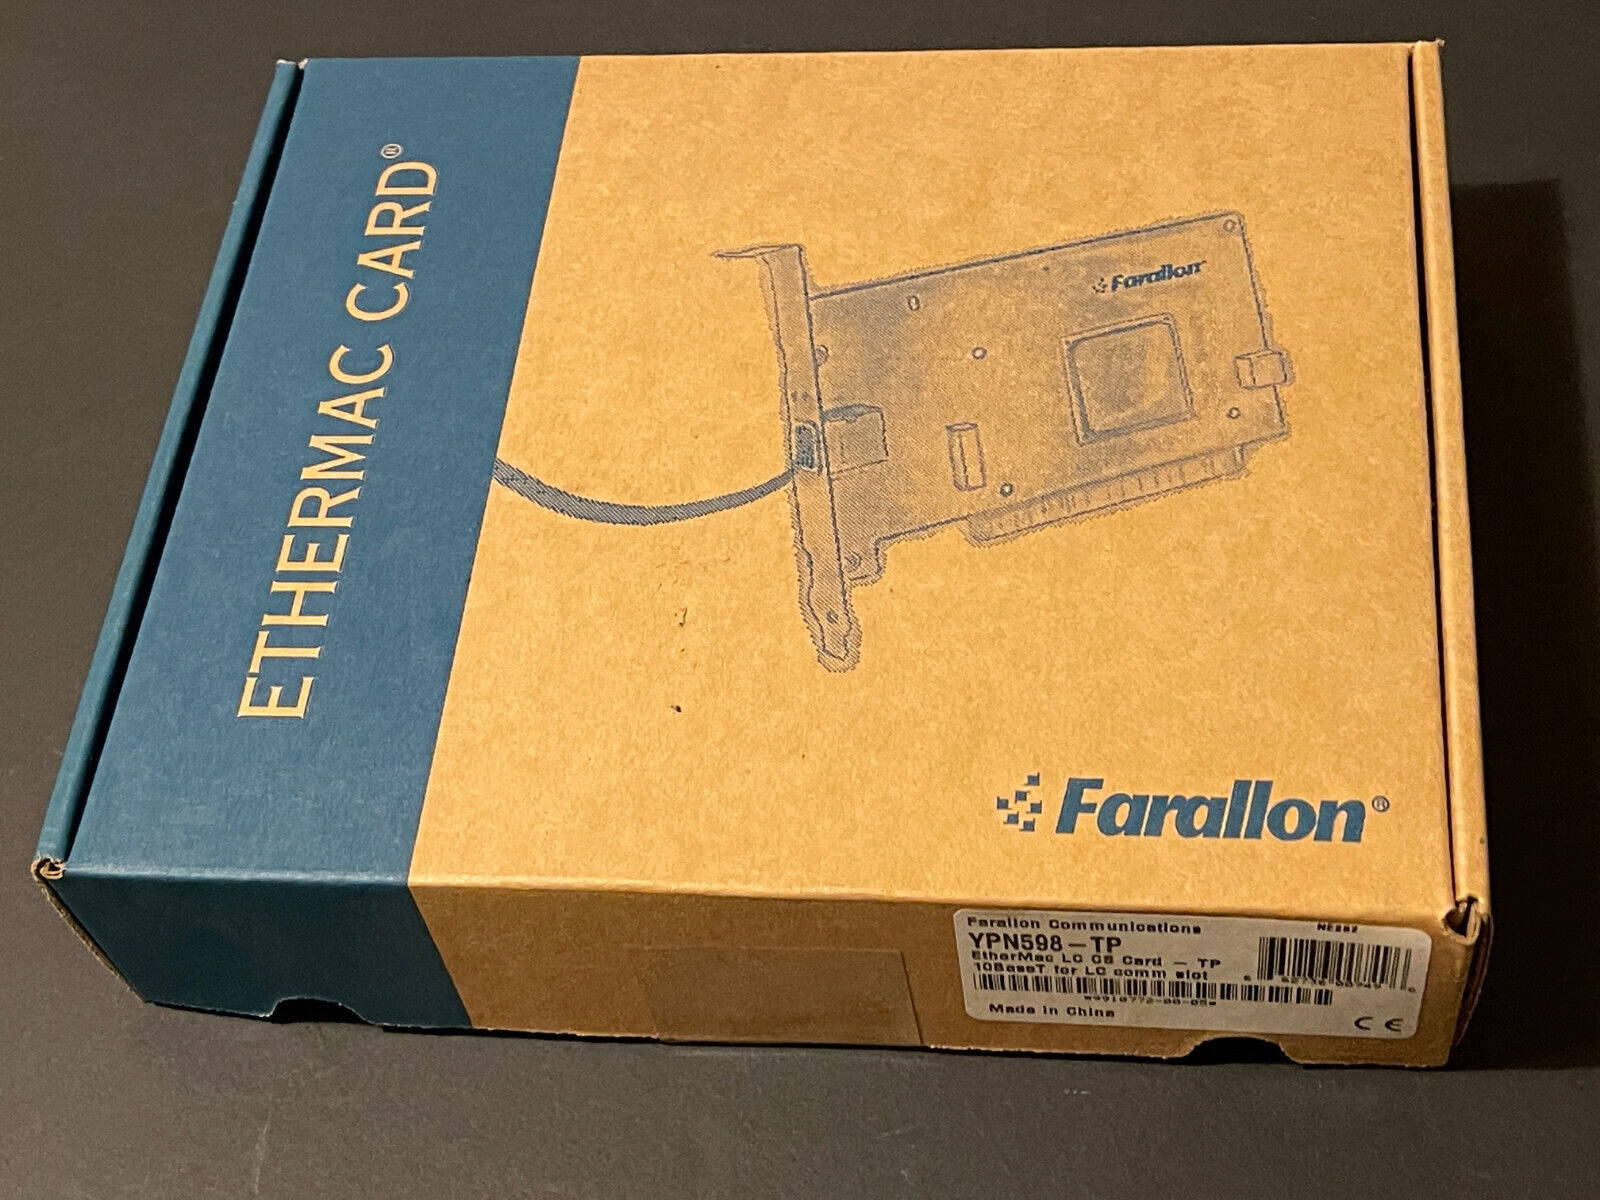 FARALLON YPN598-TP ETHERMAC LC C8 CARD ETHERNET 10Baset NETWORKING CARD New Orig